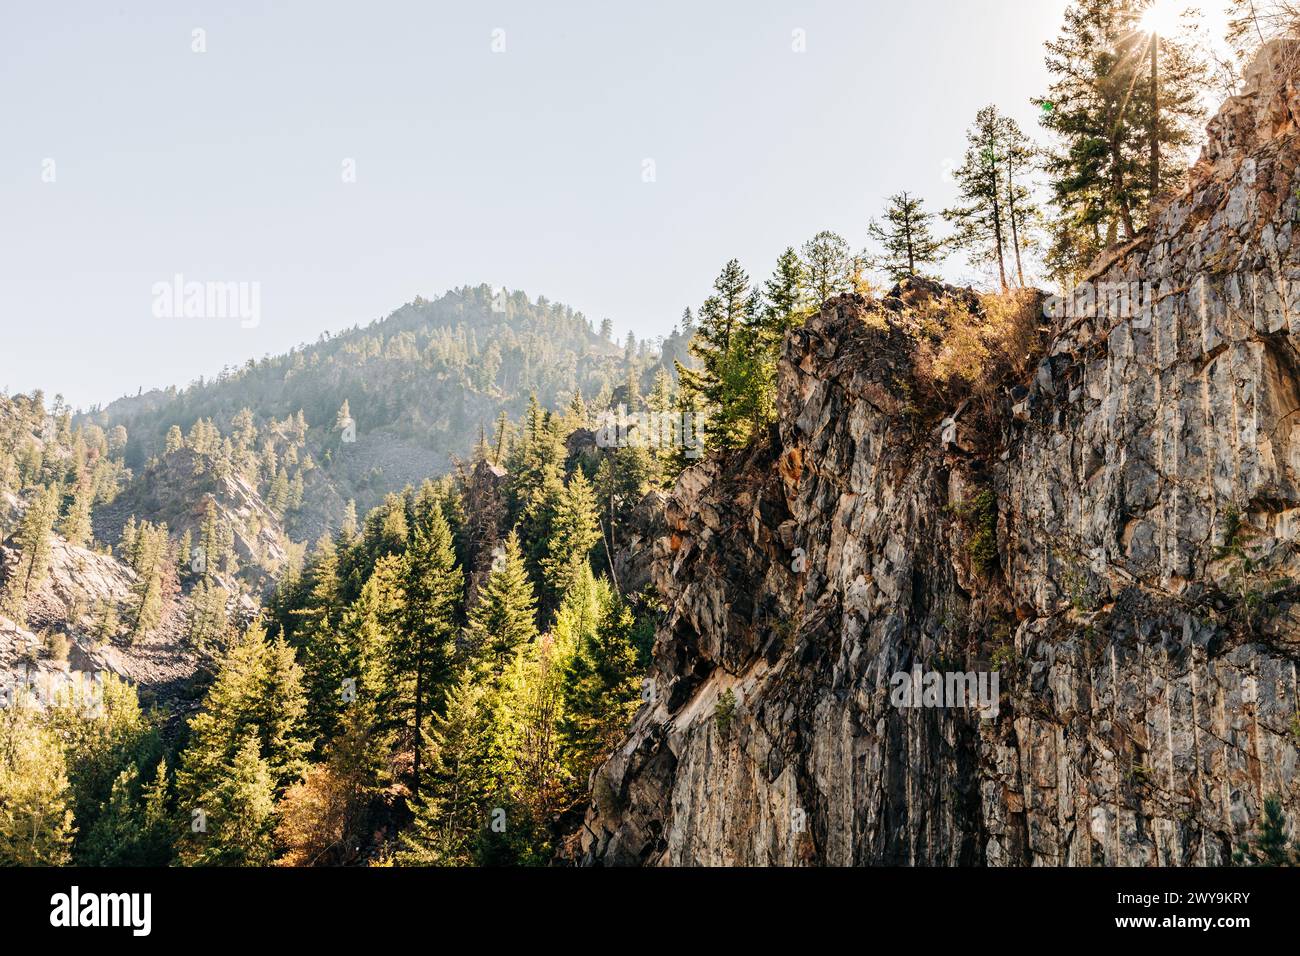 Cliffside with backlit forest trees and sunburst effect Stock Photo